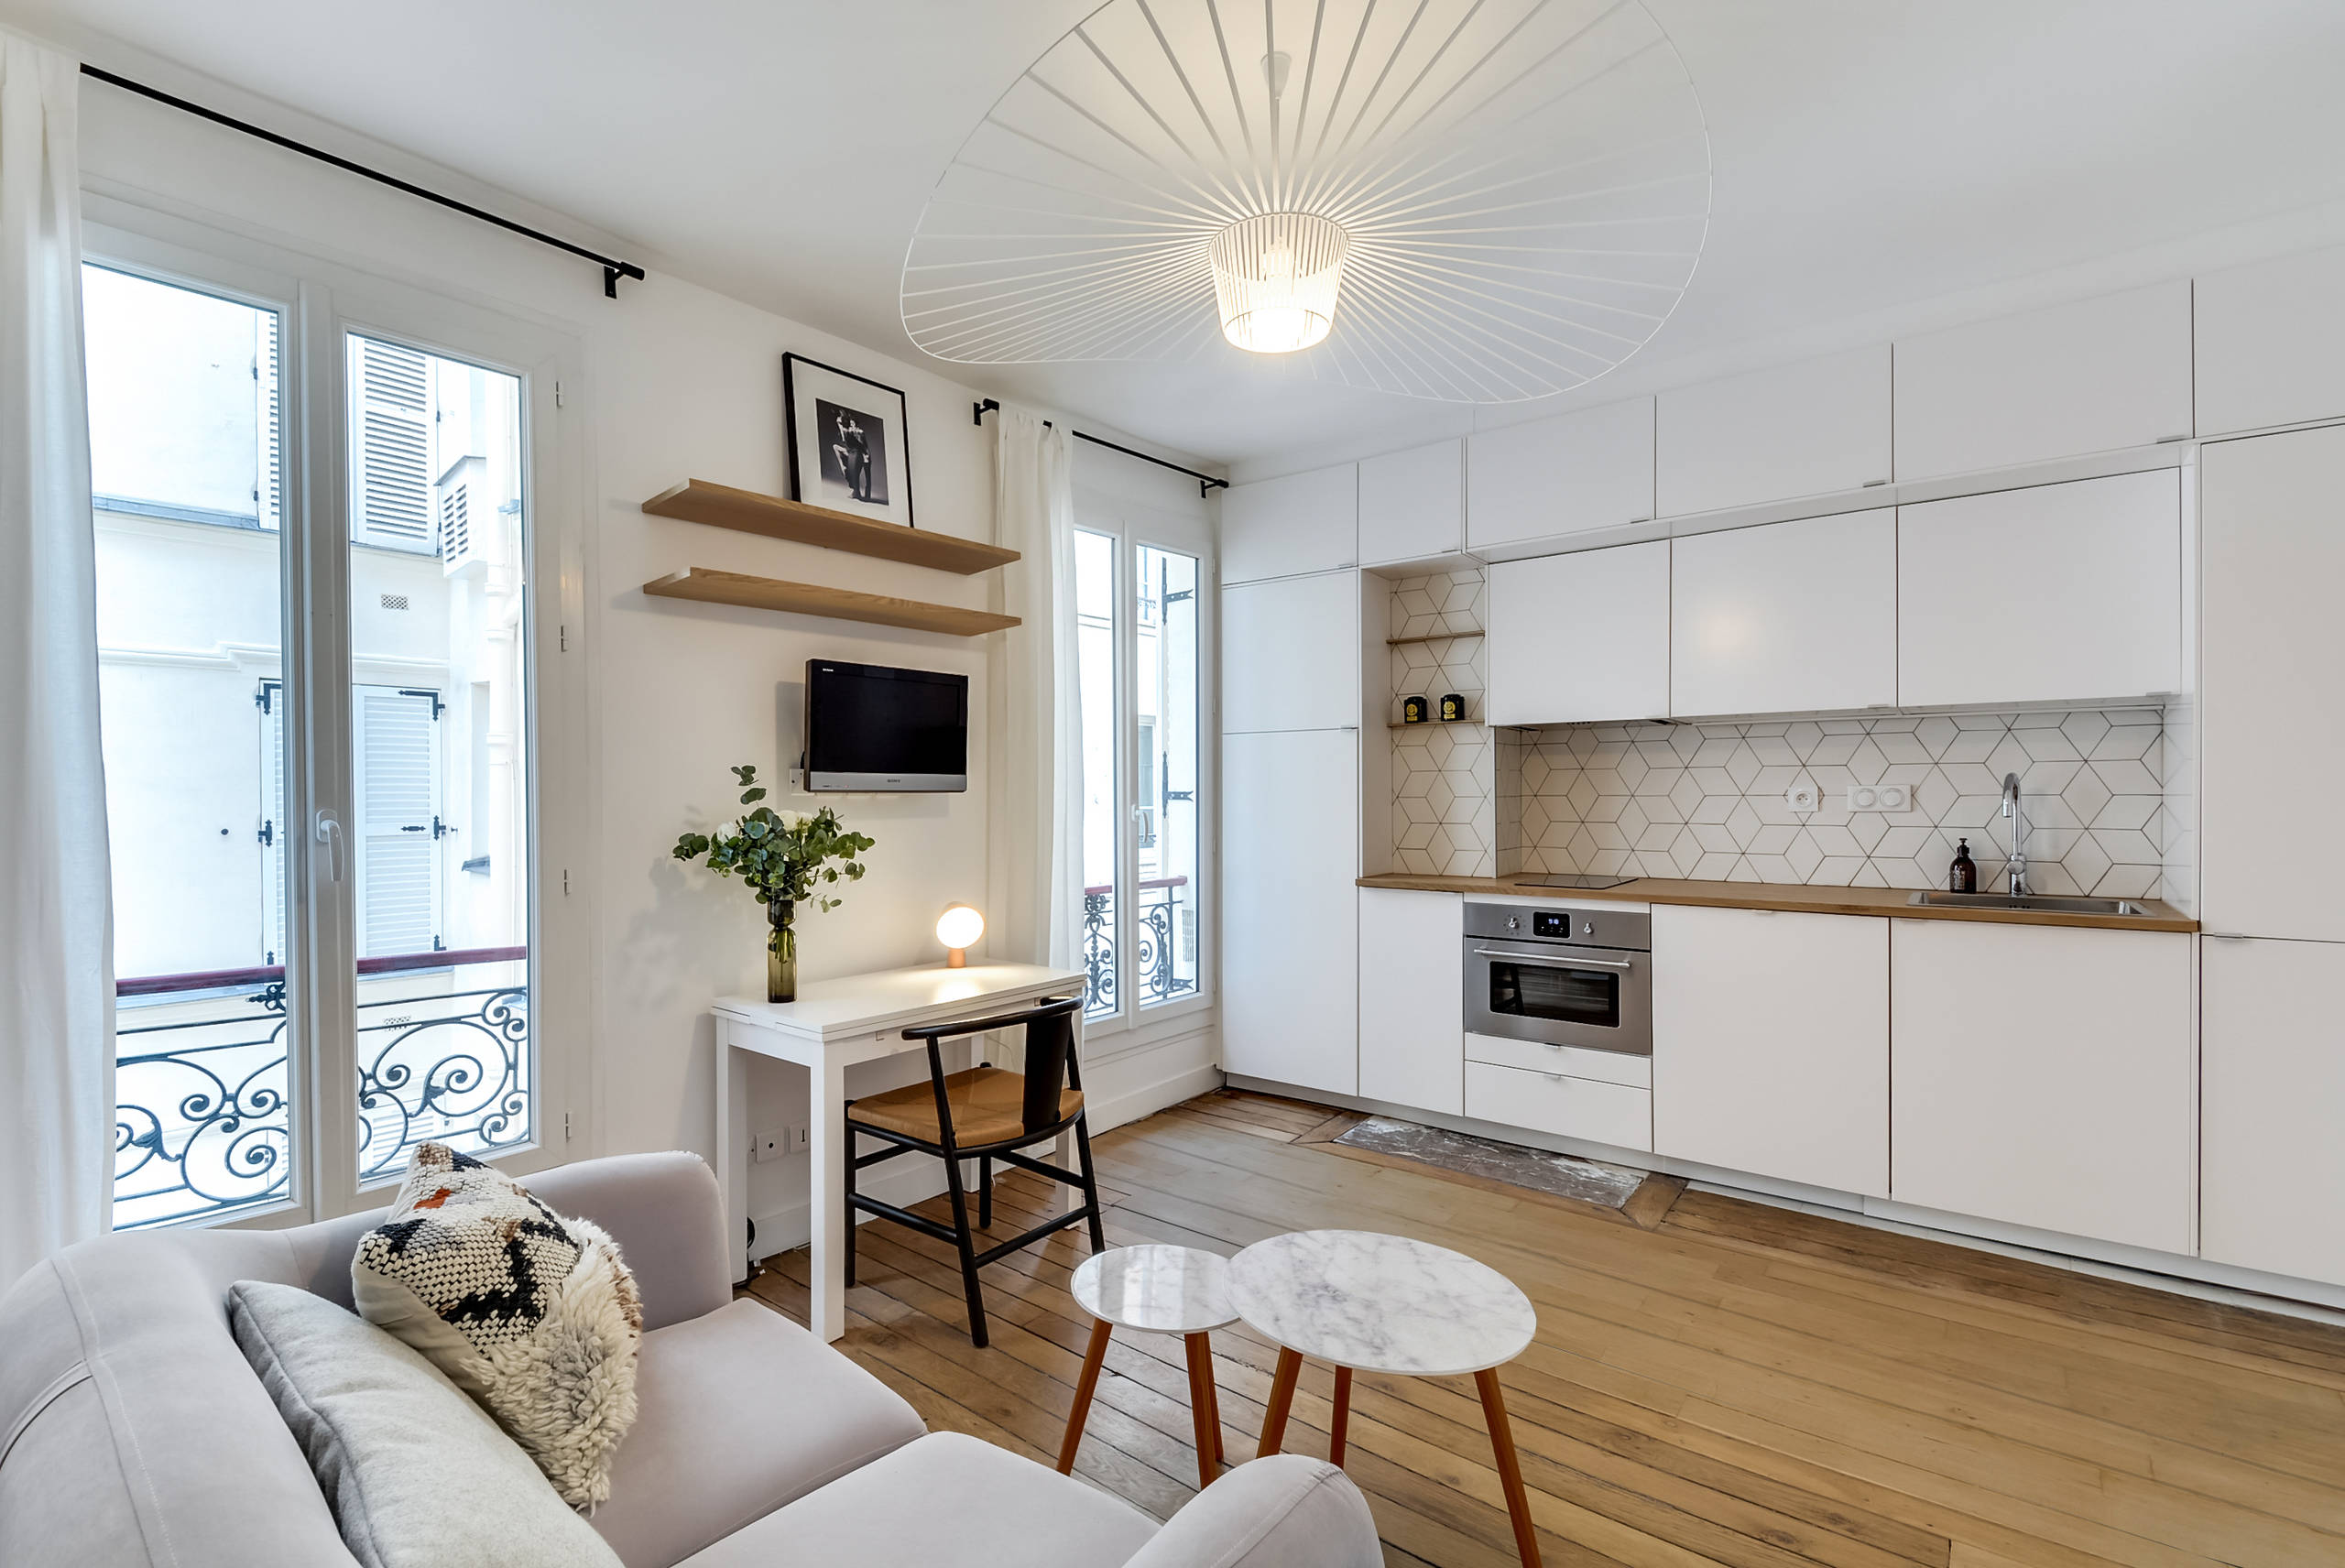 10+ small apartment living tips from design experts